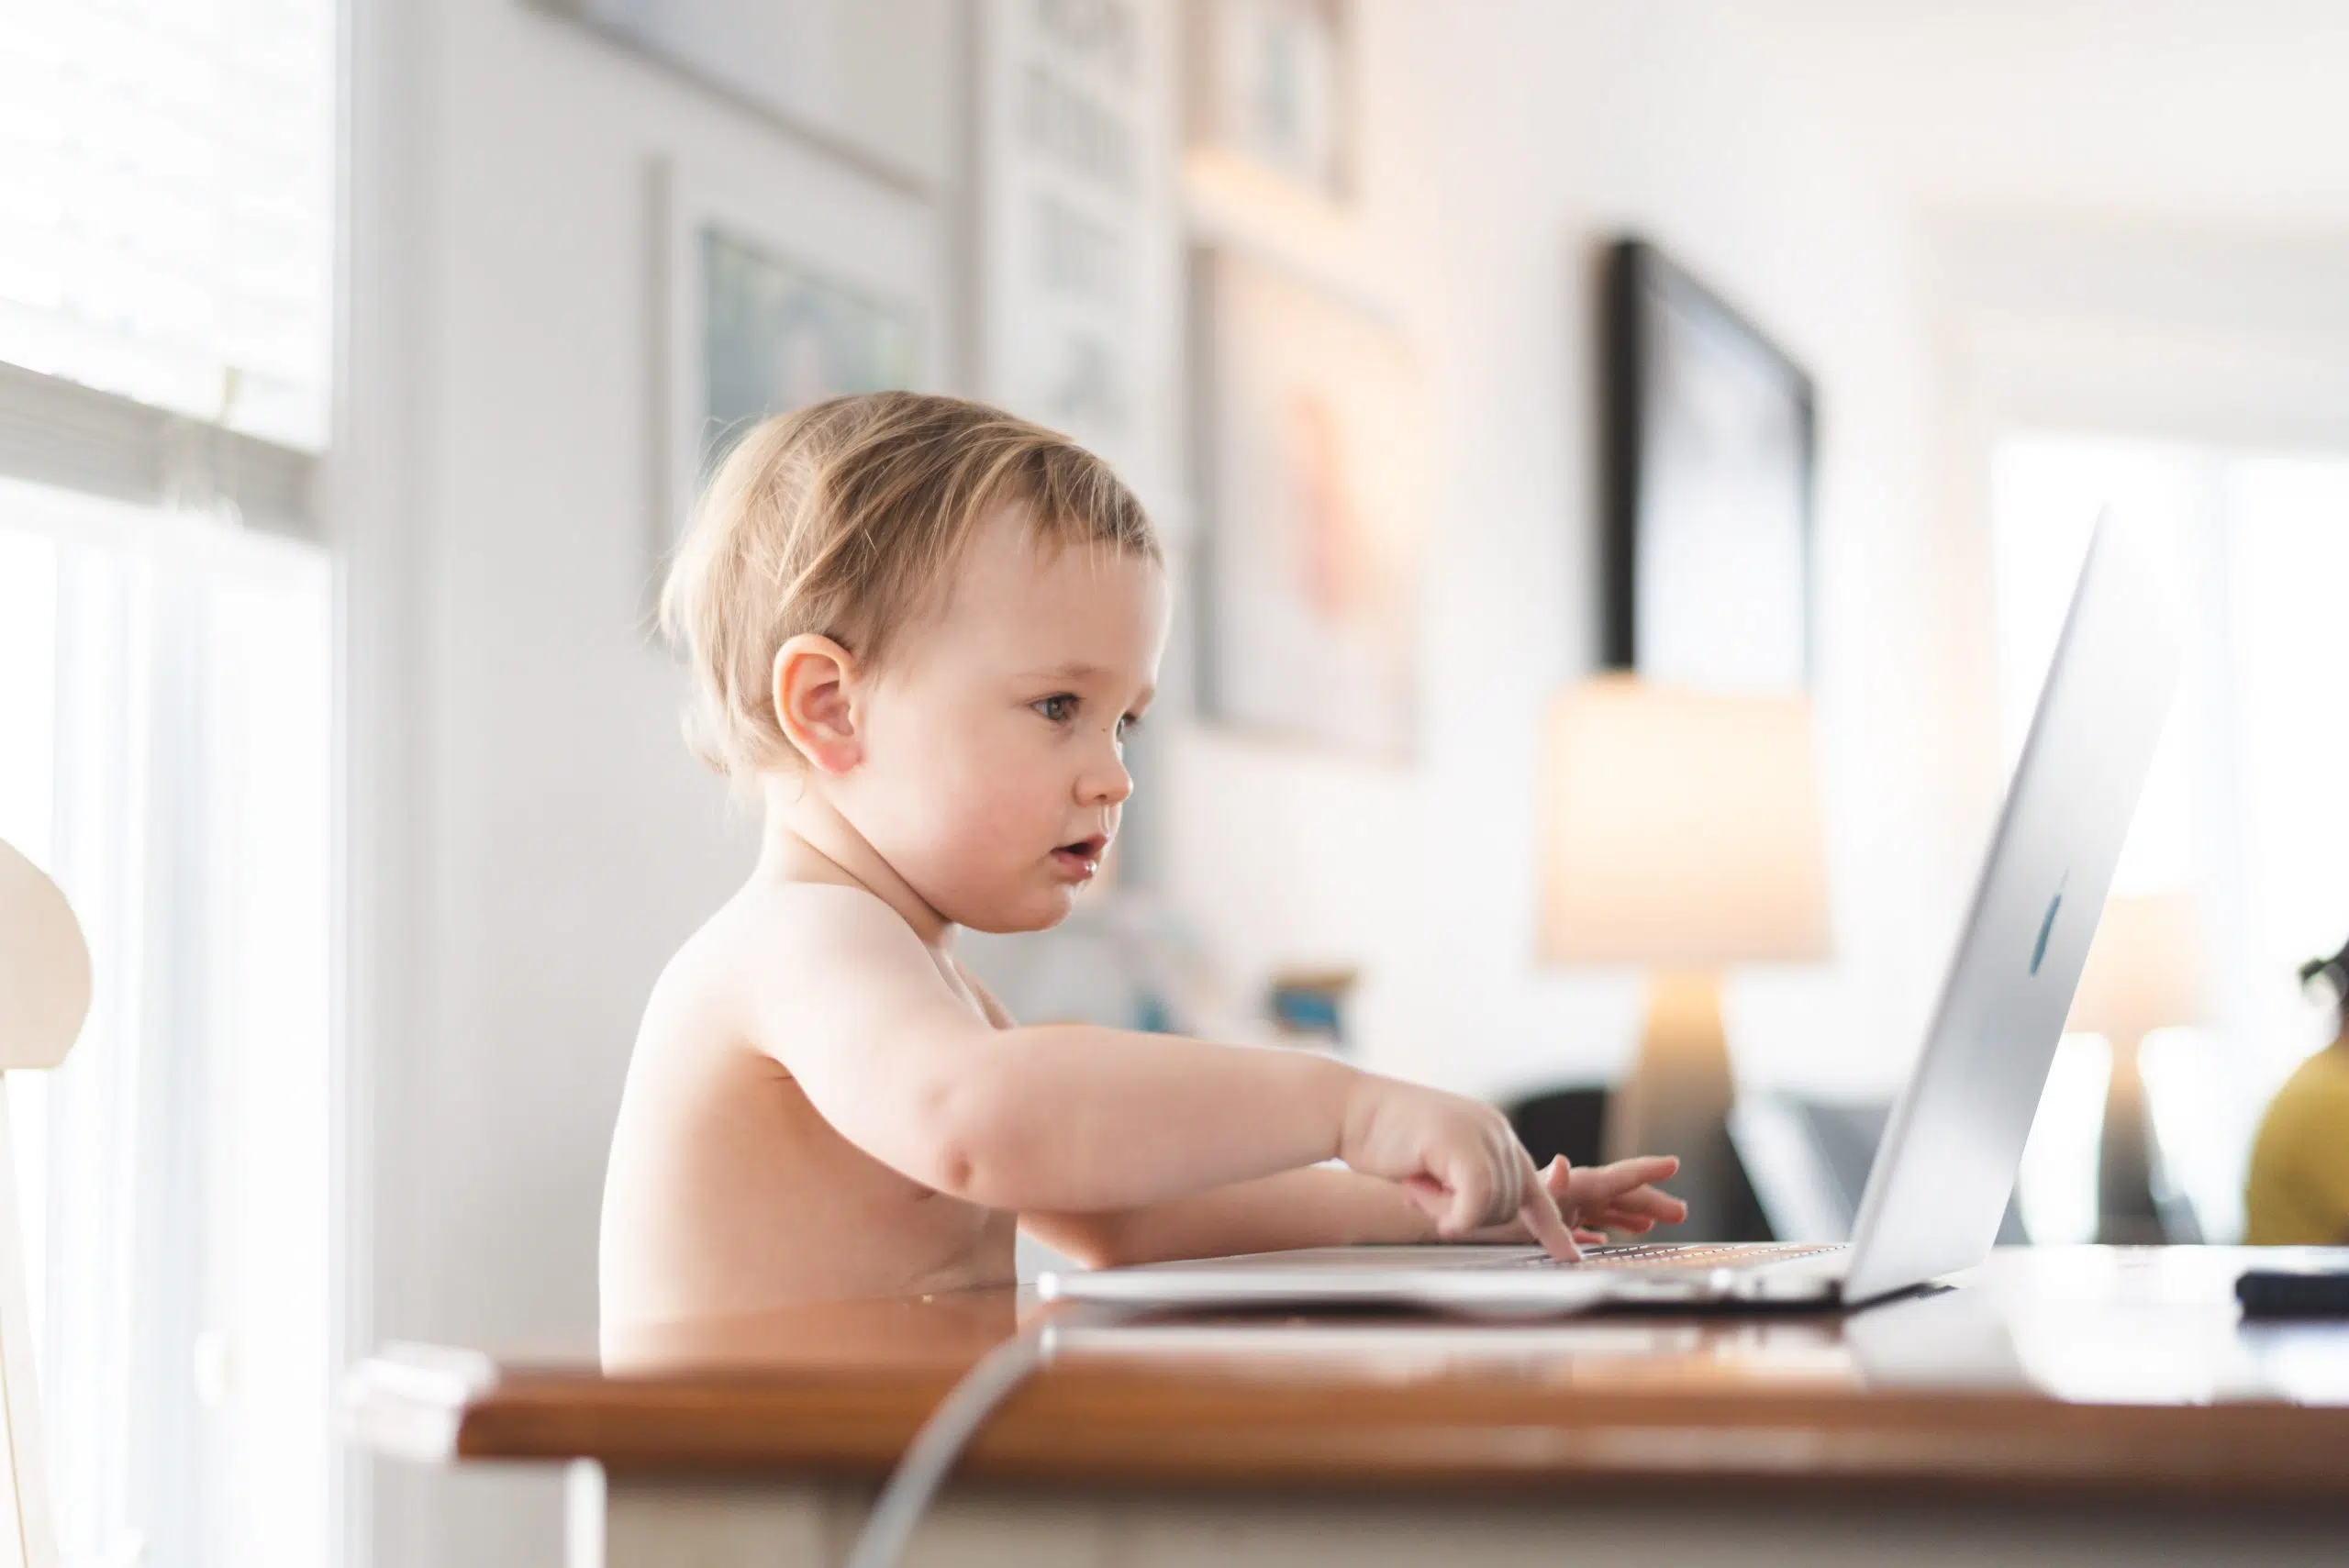 Too much screen time as an infant could impact learning and social skills later in life